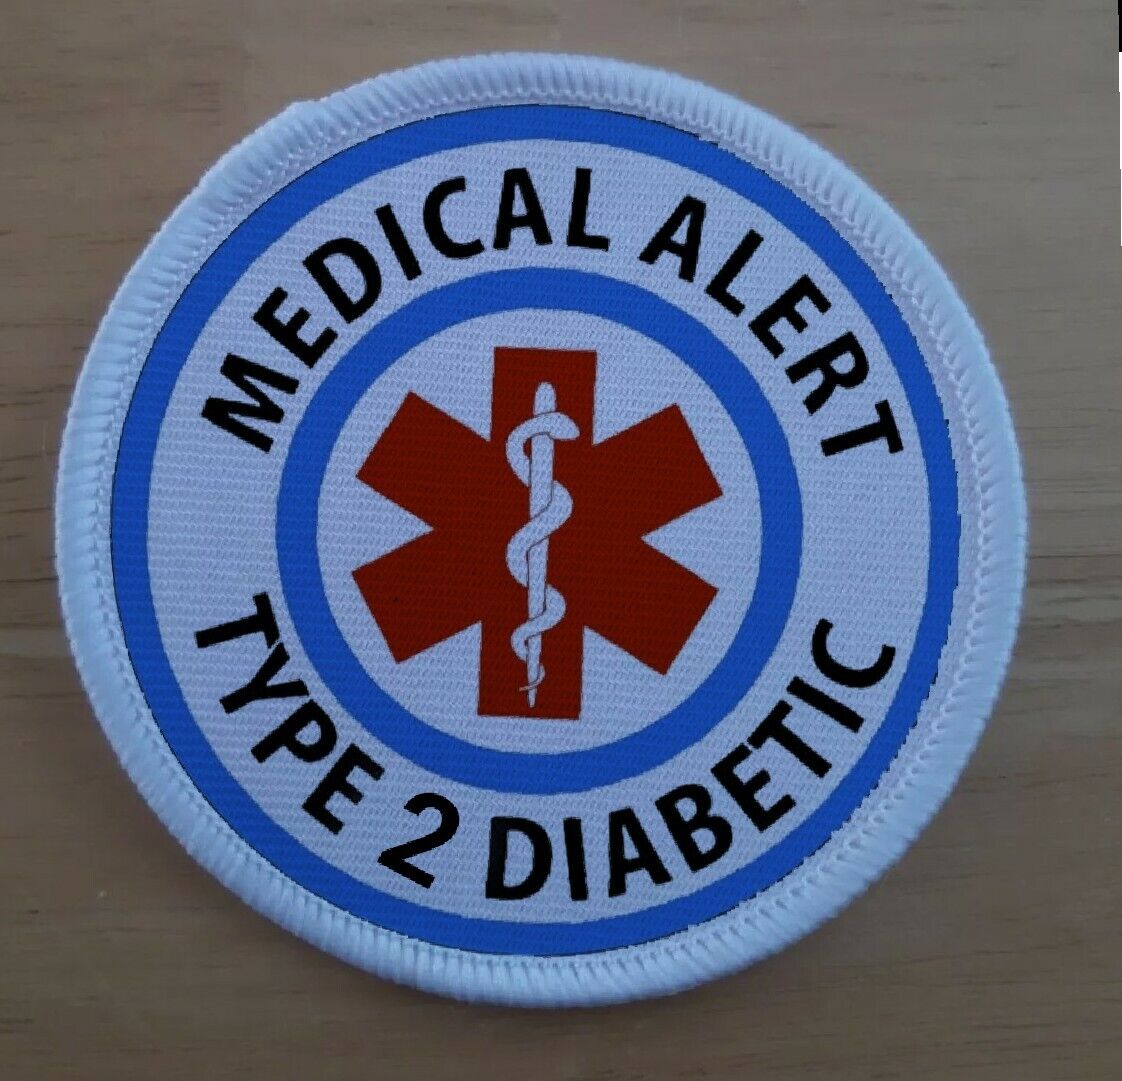  Type 2 Diabetic Diabetes Awareness Patch Badge patches badges